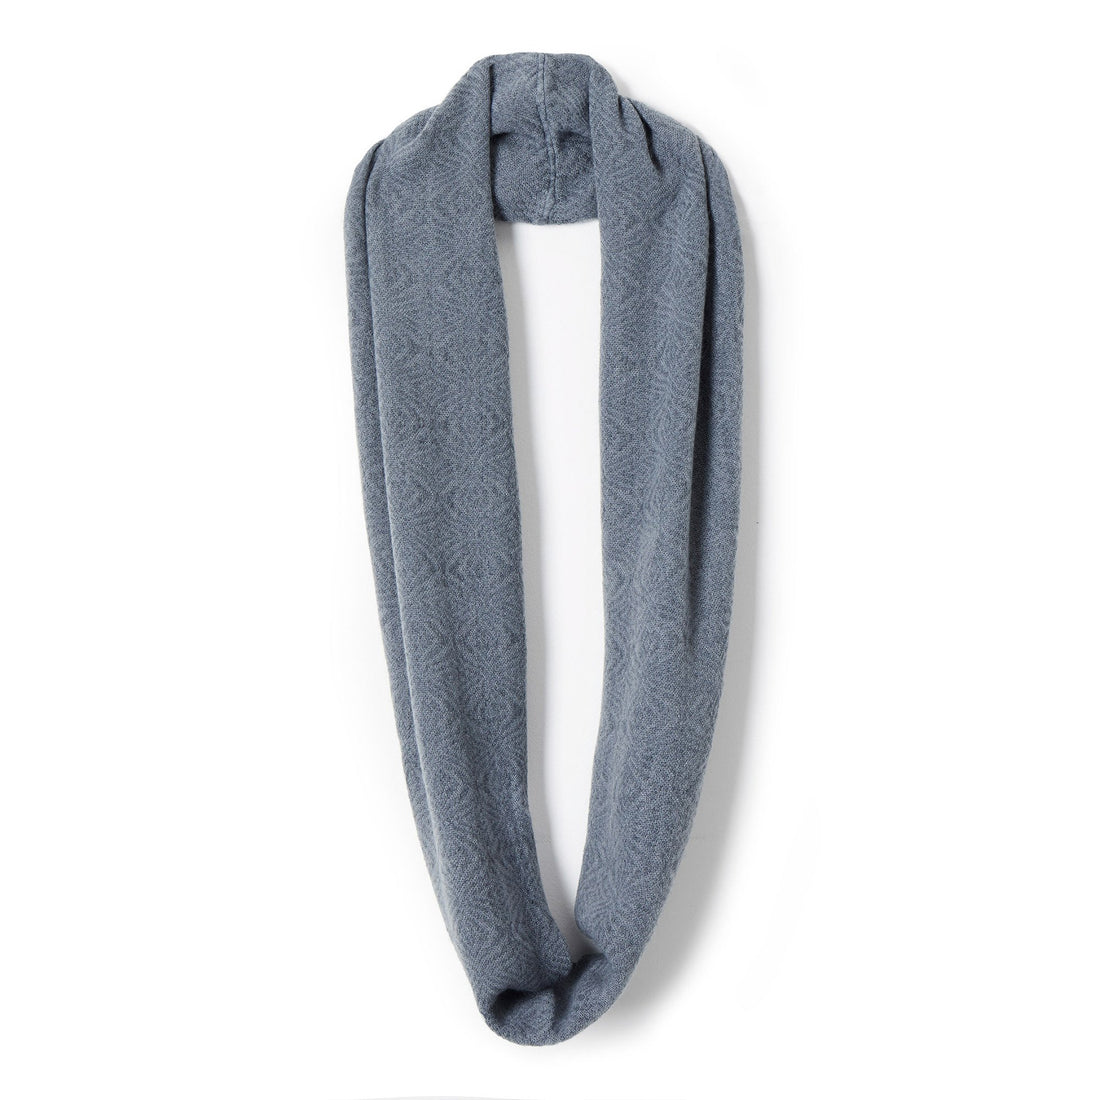 Cool Gray Infinity Scarf - FINAL SALE